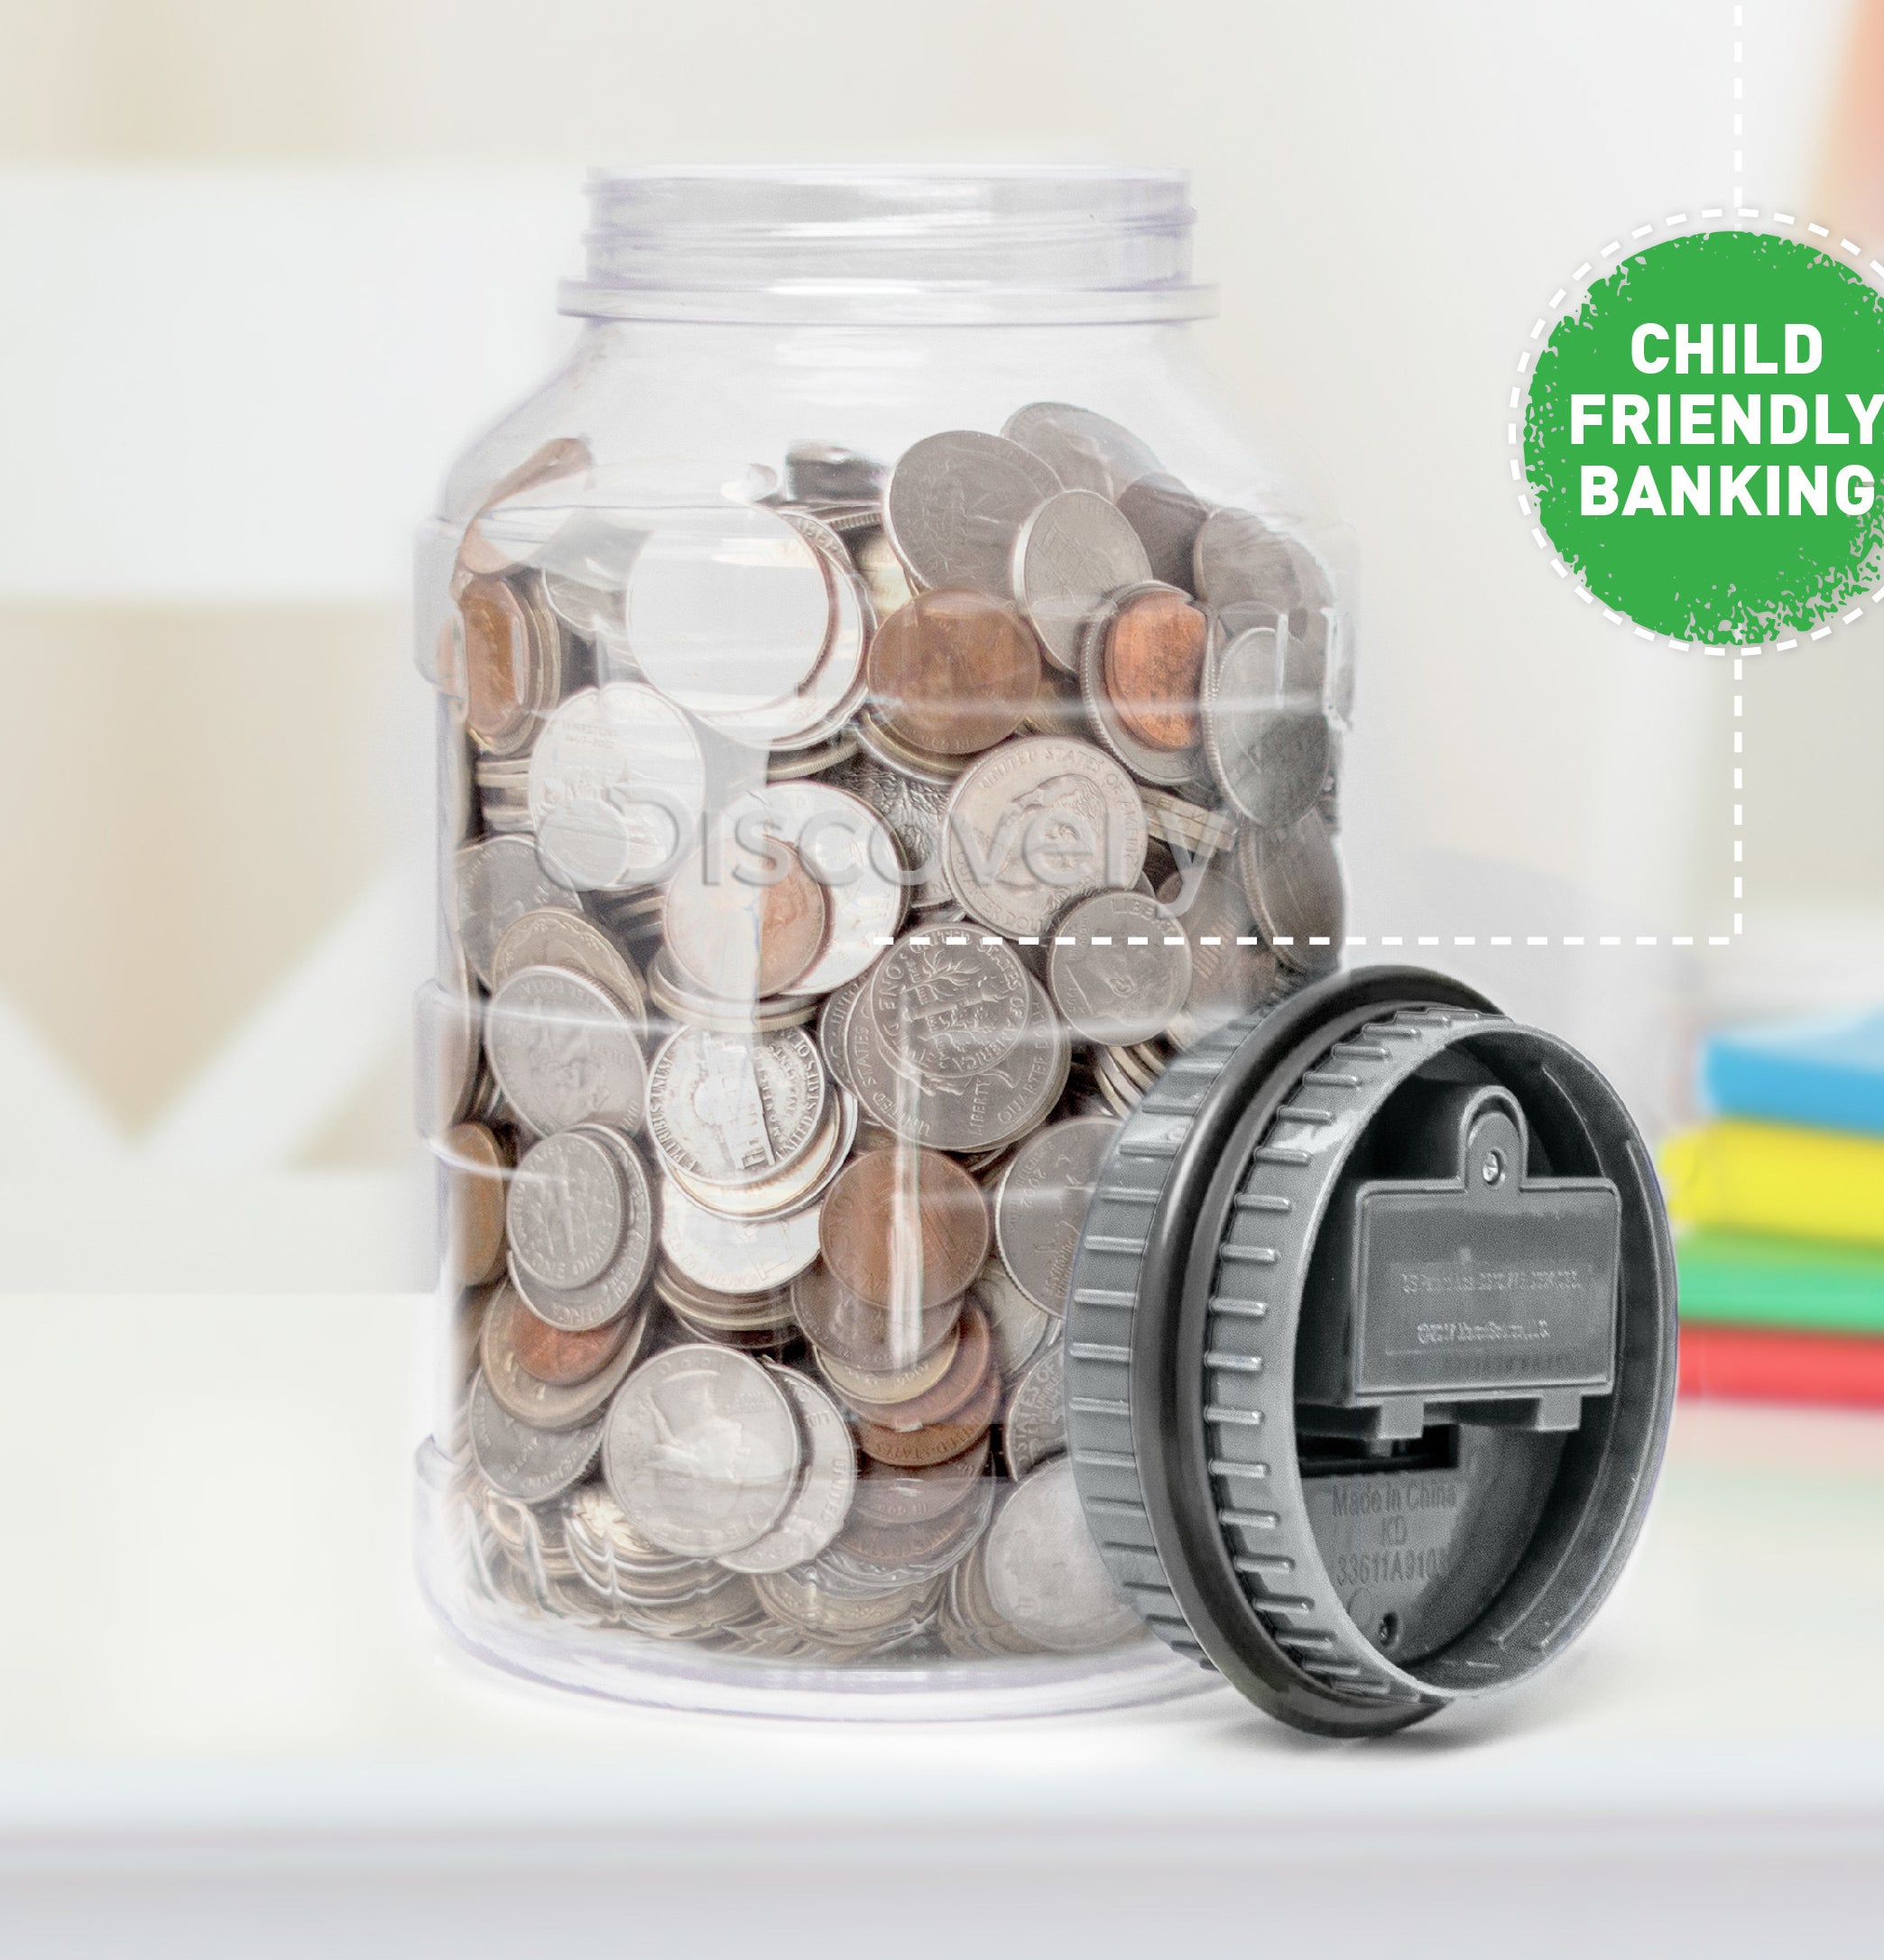 the clear coin counting jar